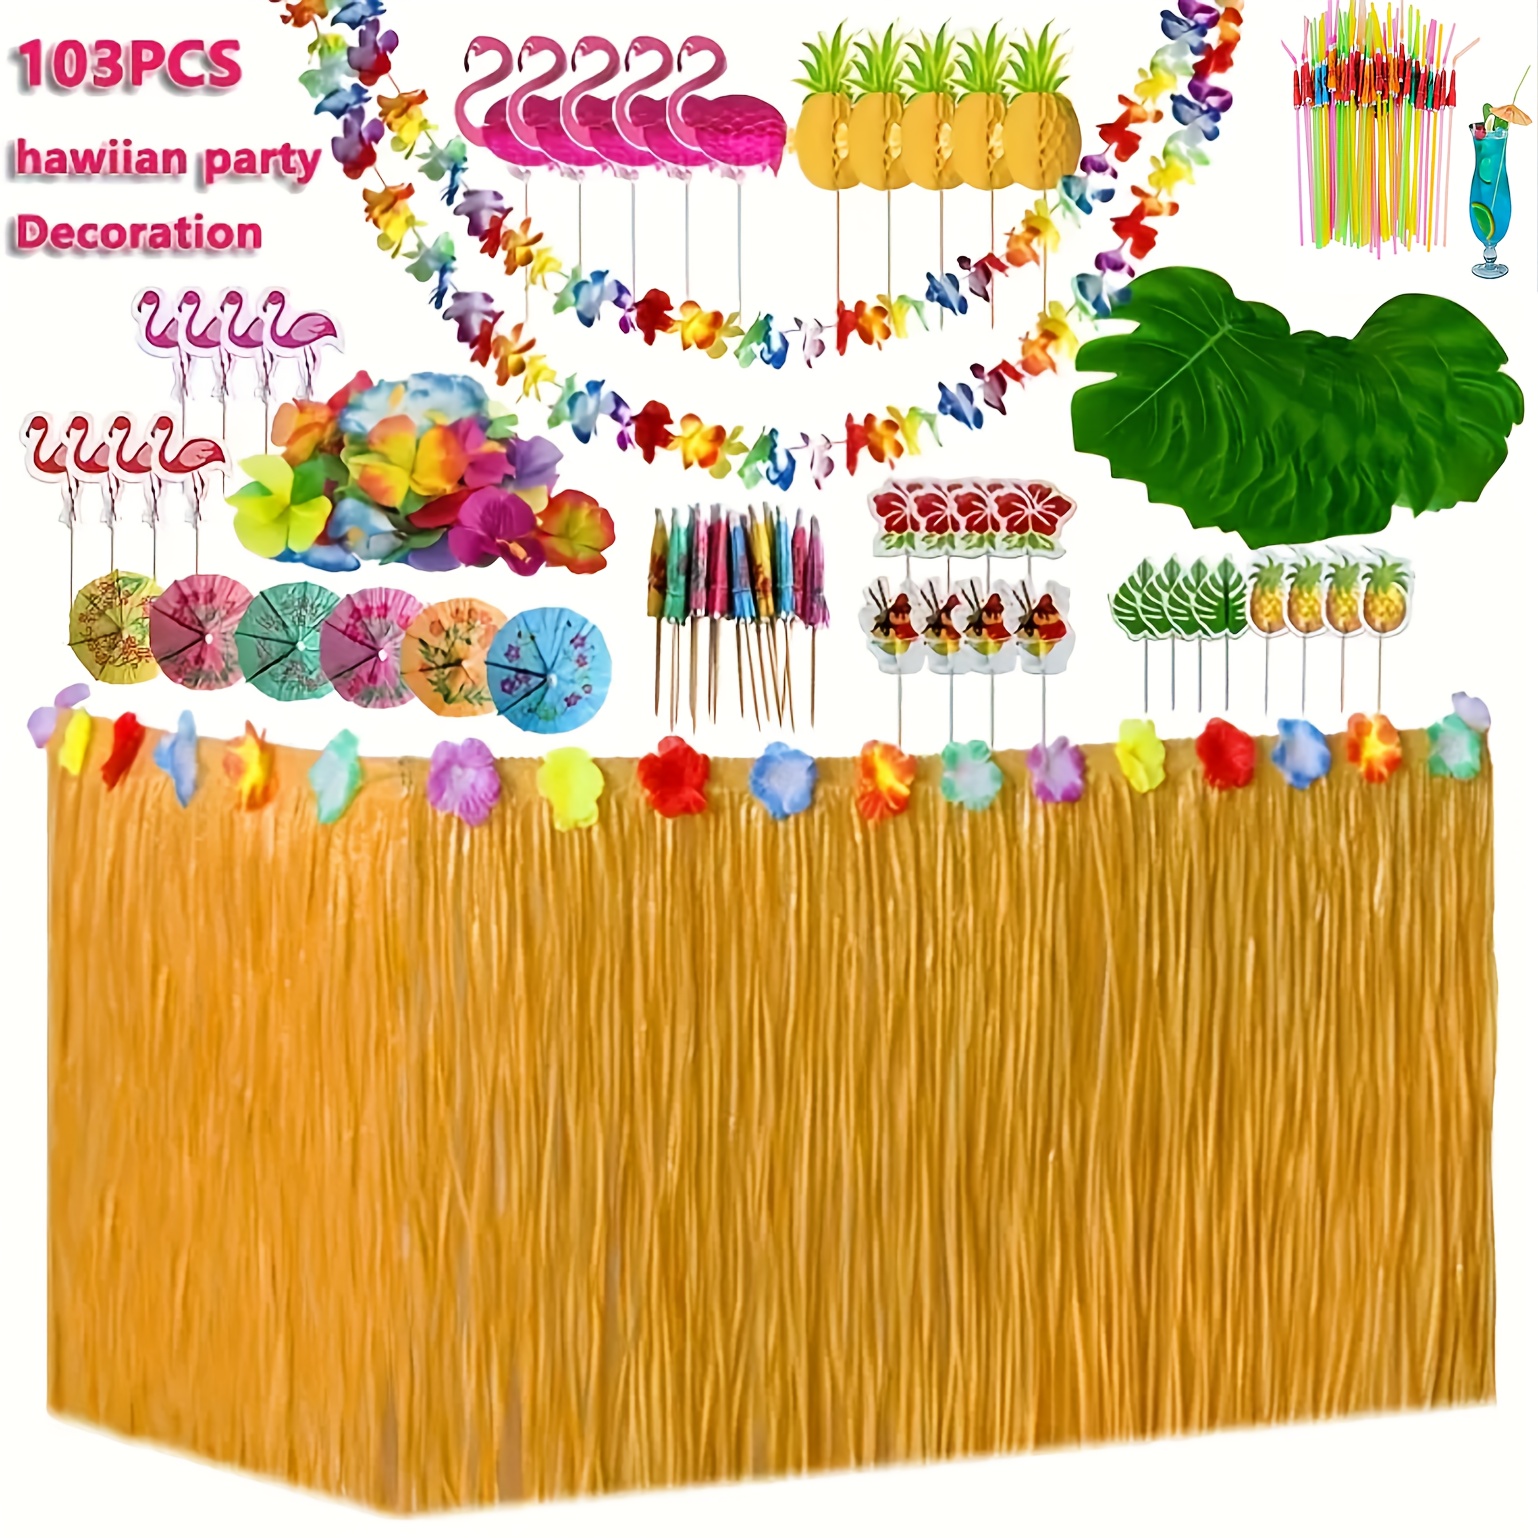 103pcs, Hawaiian Beach Party Supplies Set - Tropical Beach Decorations,  Table Skirt, Straw, Flamingo, Pineapple - Perfect for Summer Theme Parties